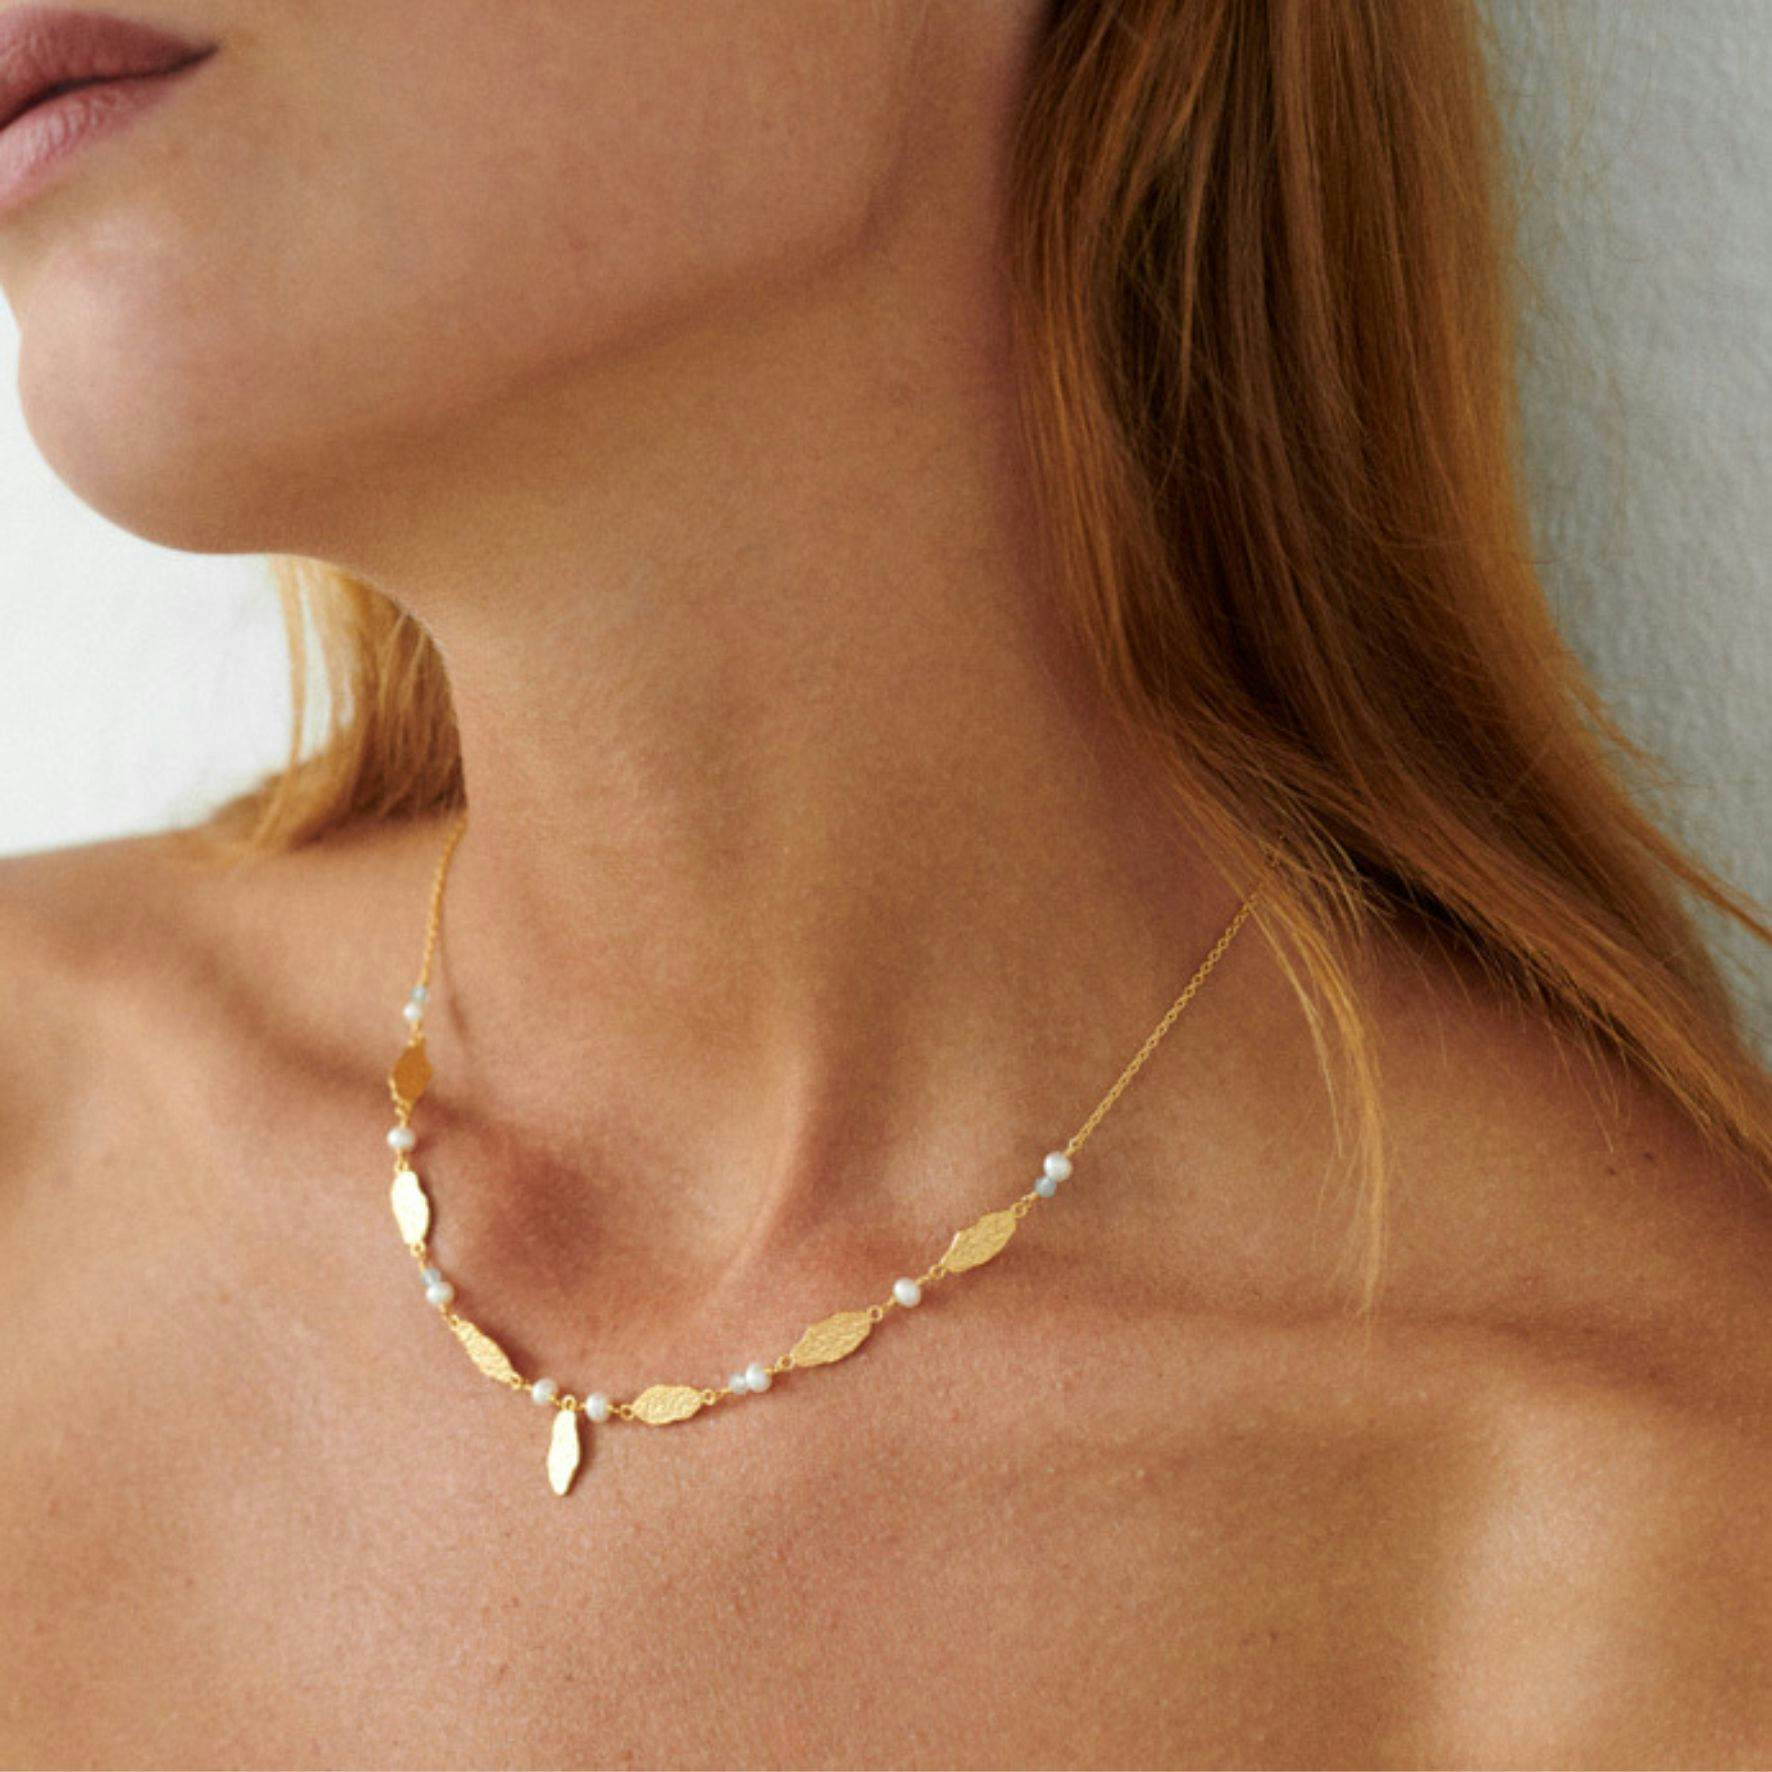 Drifting Dream Necklace from Pernille Corydon in Goldplated-Silver Sterling 925